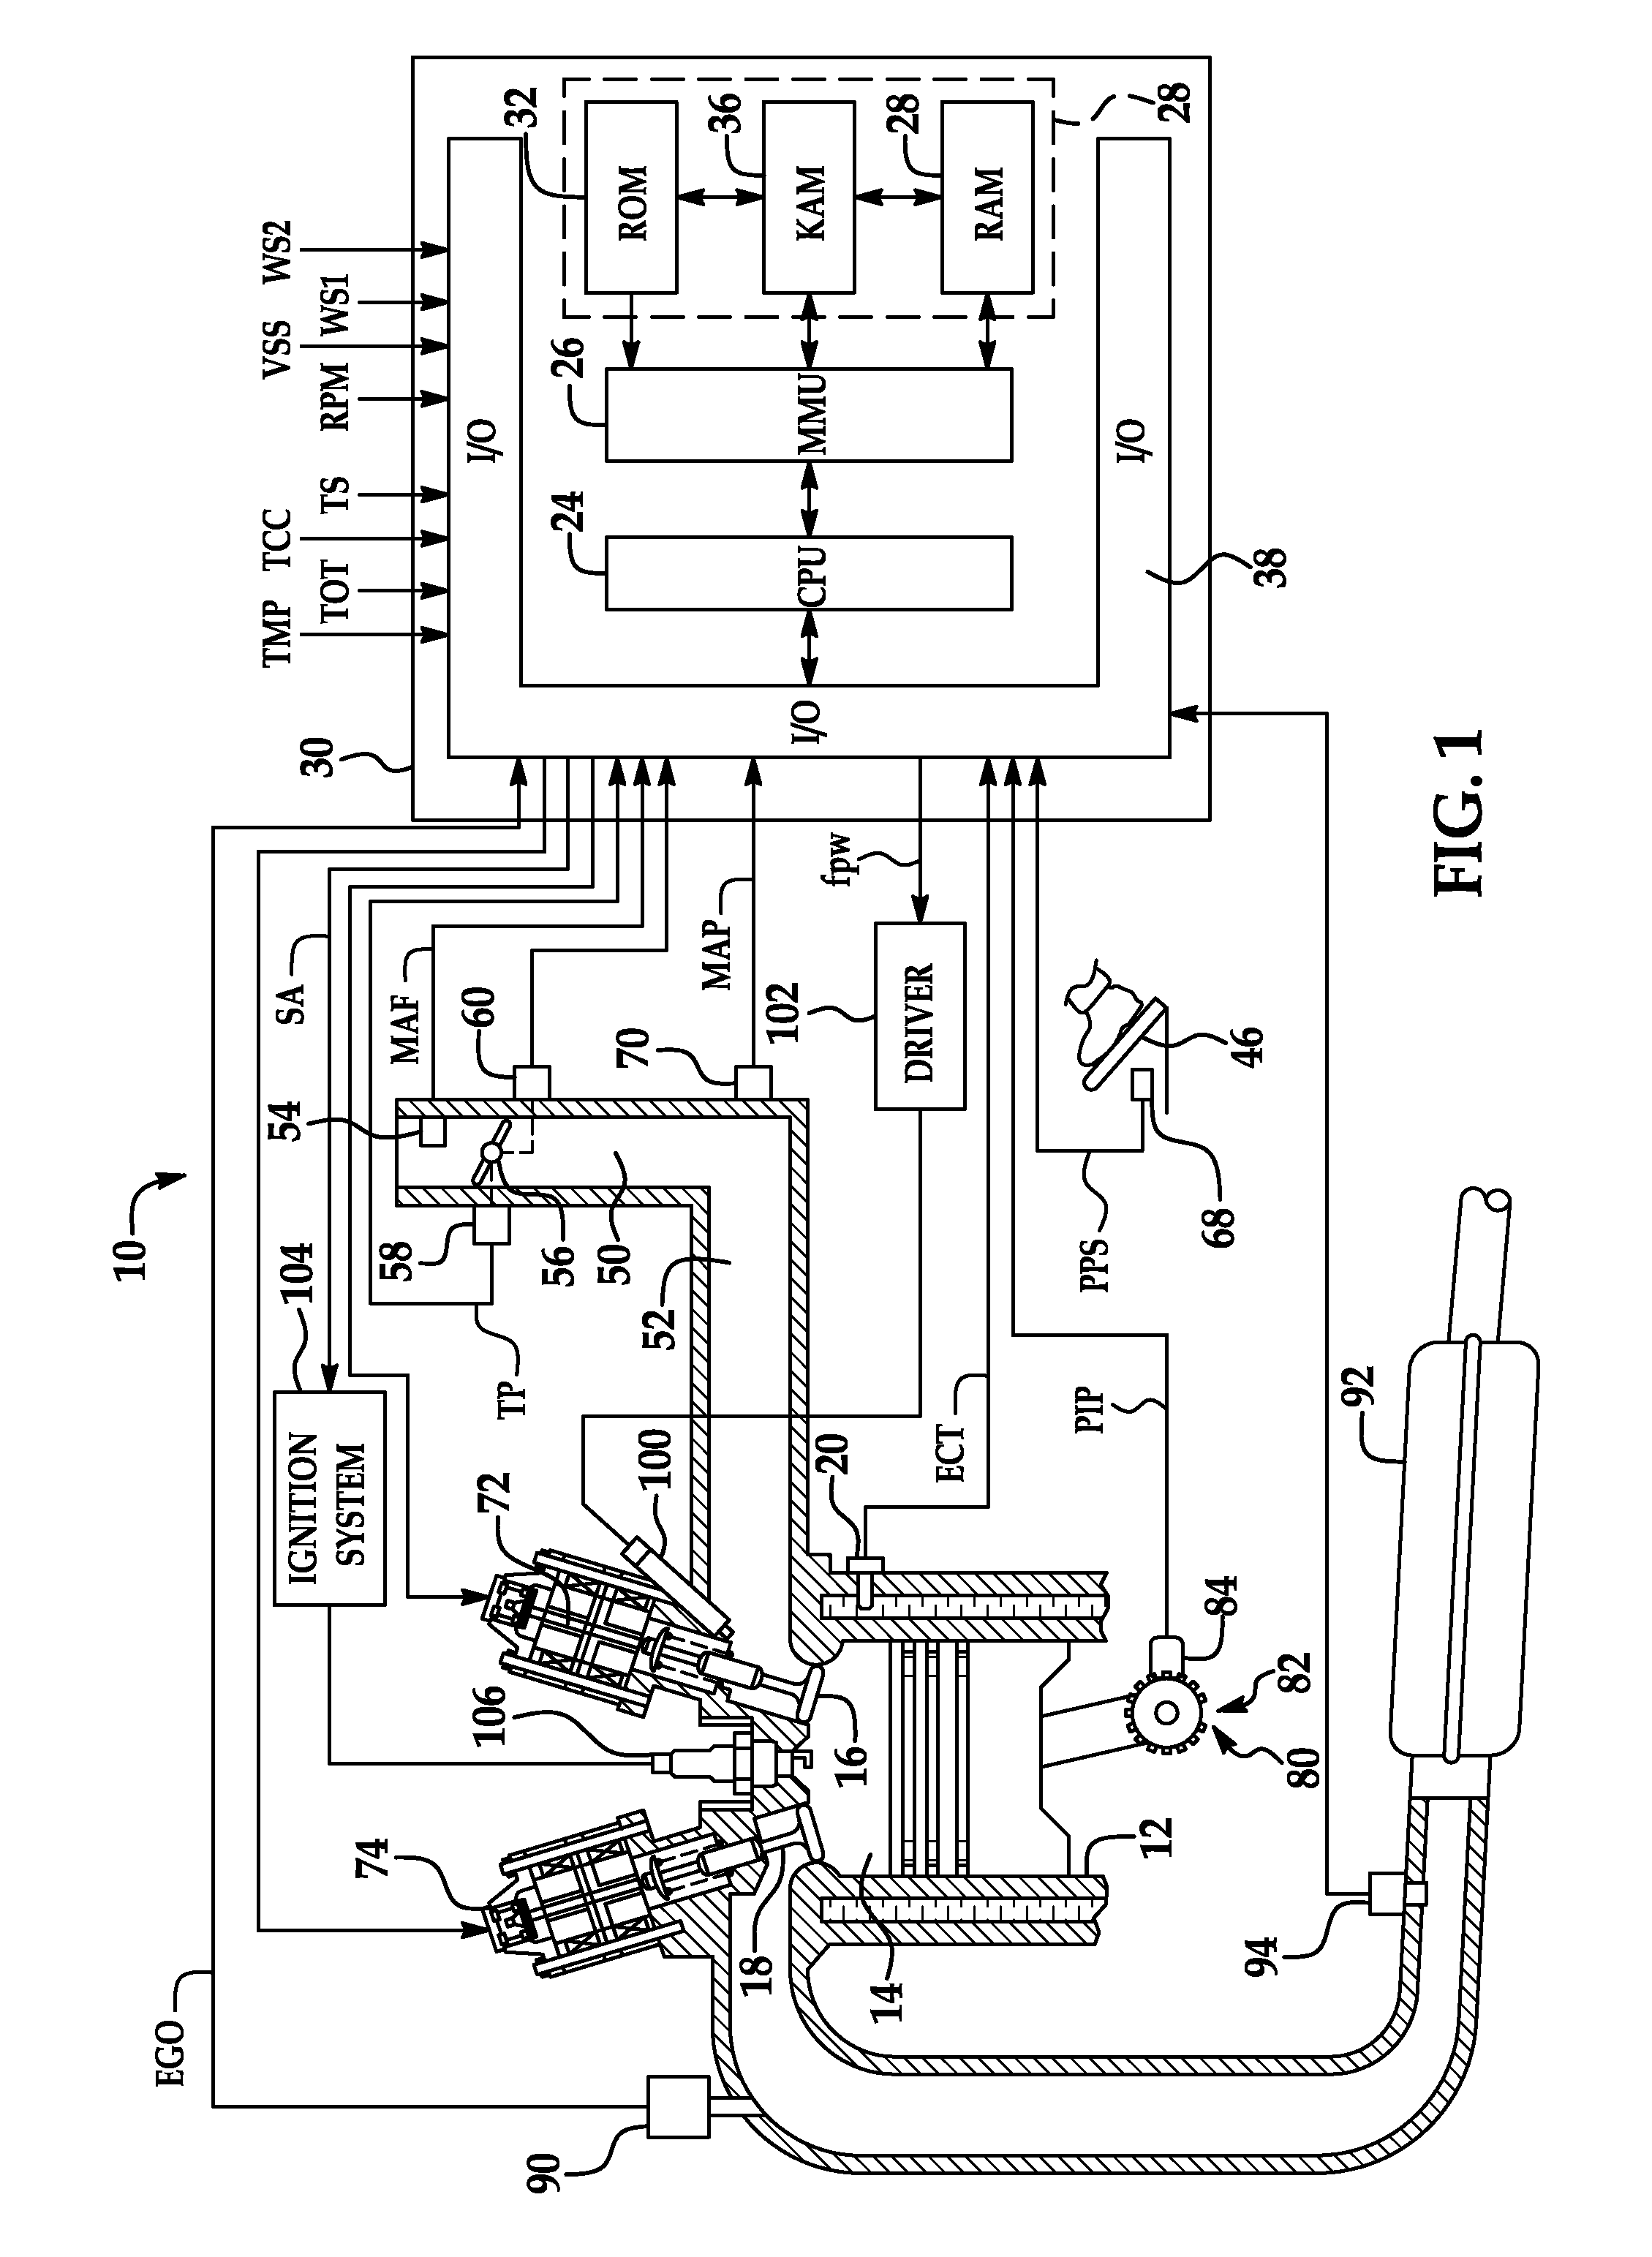 Engine control with valve deactivation monitoring using exhaust pressure